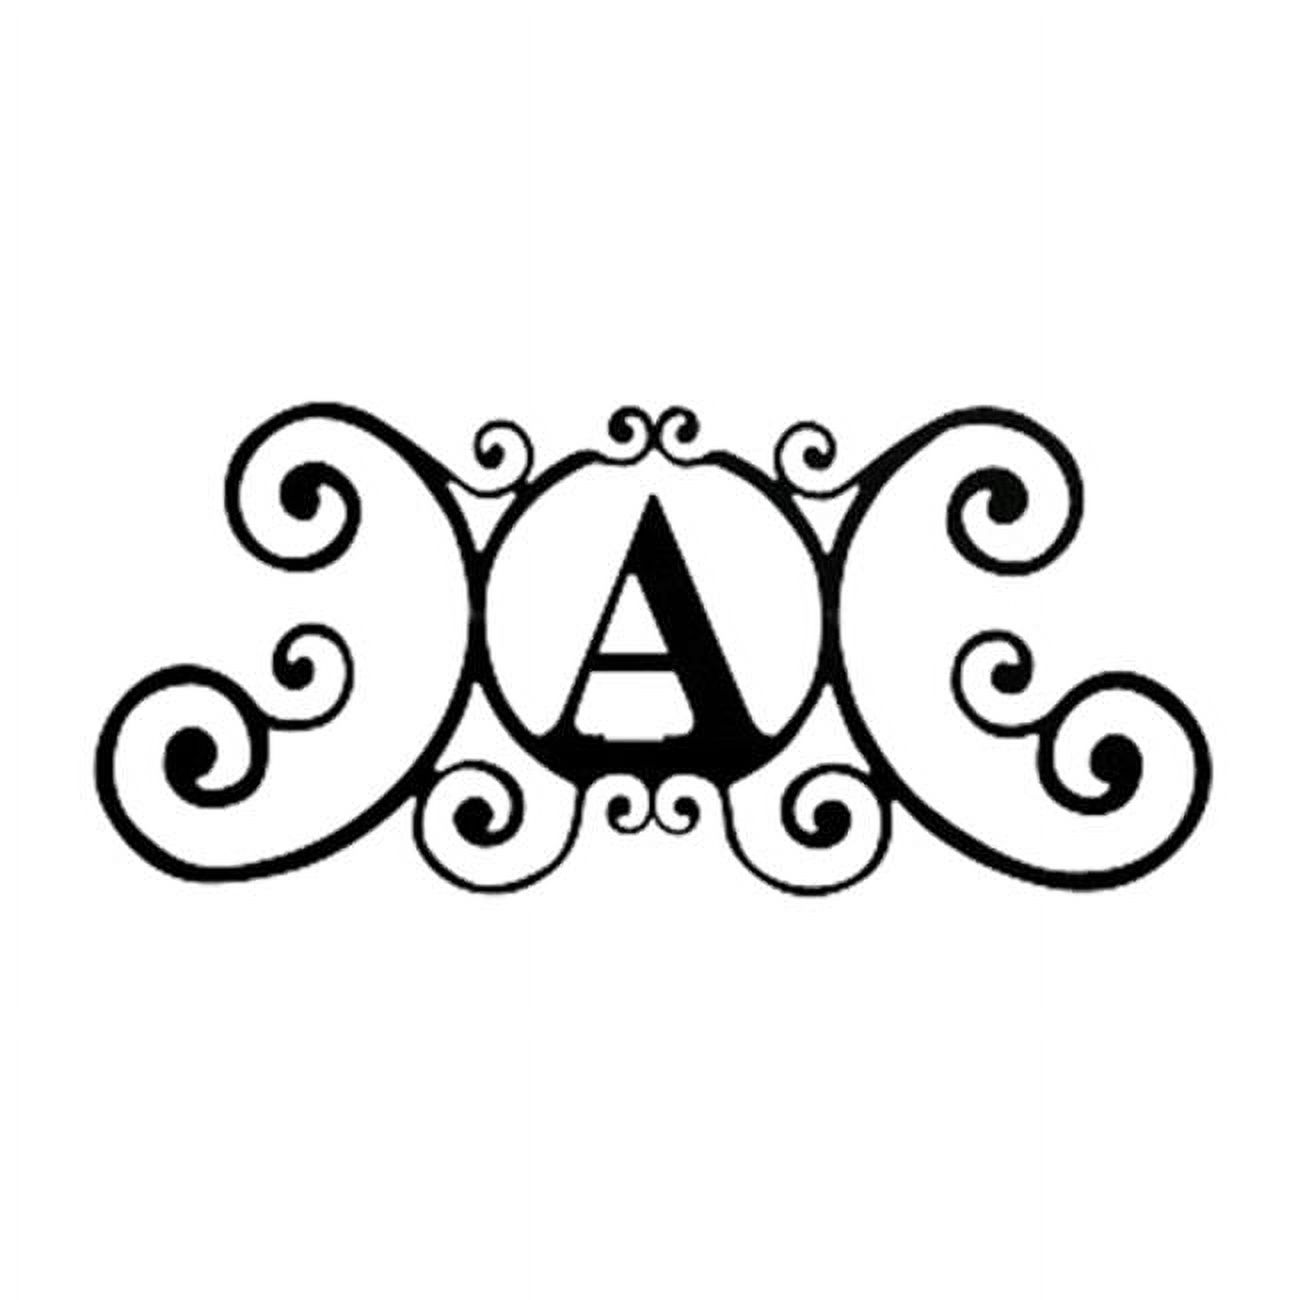 Village Wrought Iron  House Plaque Letter A - image 1 of 3